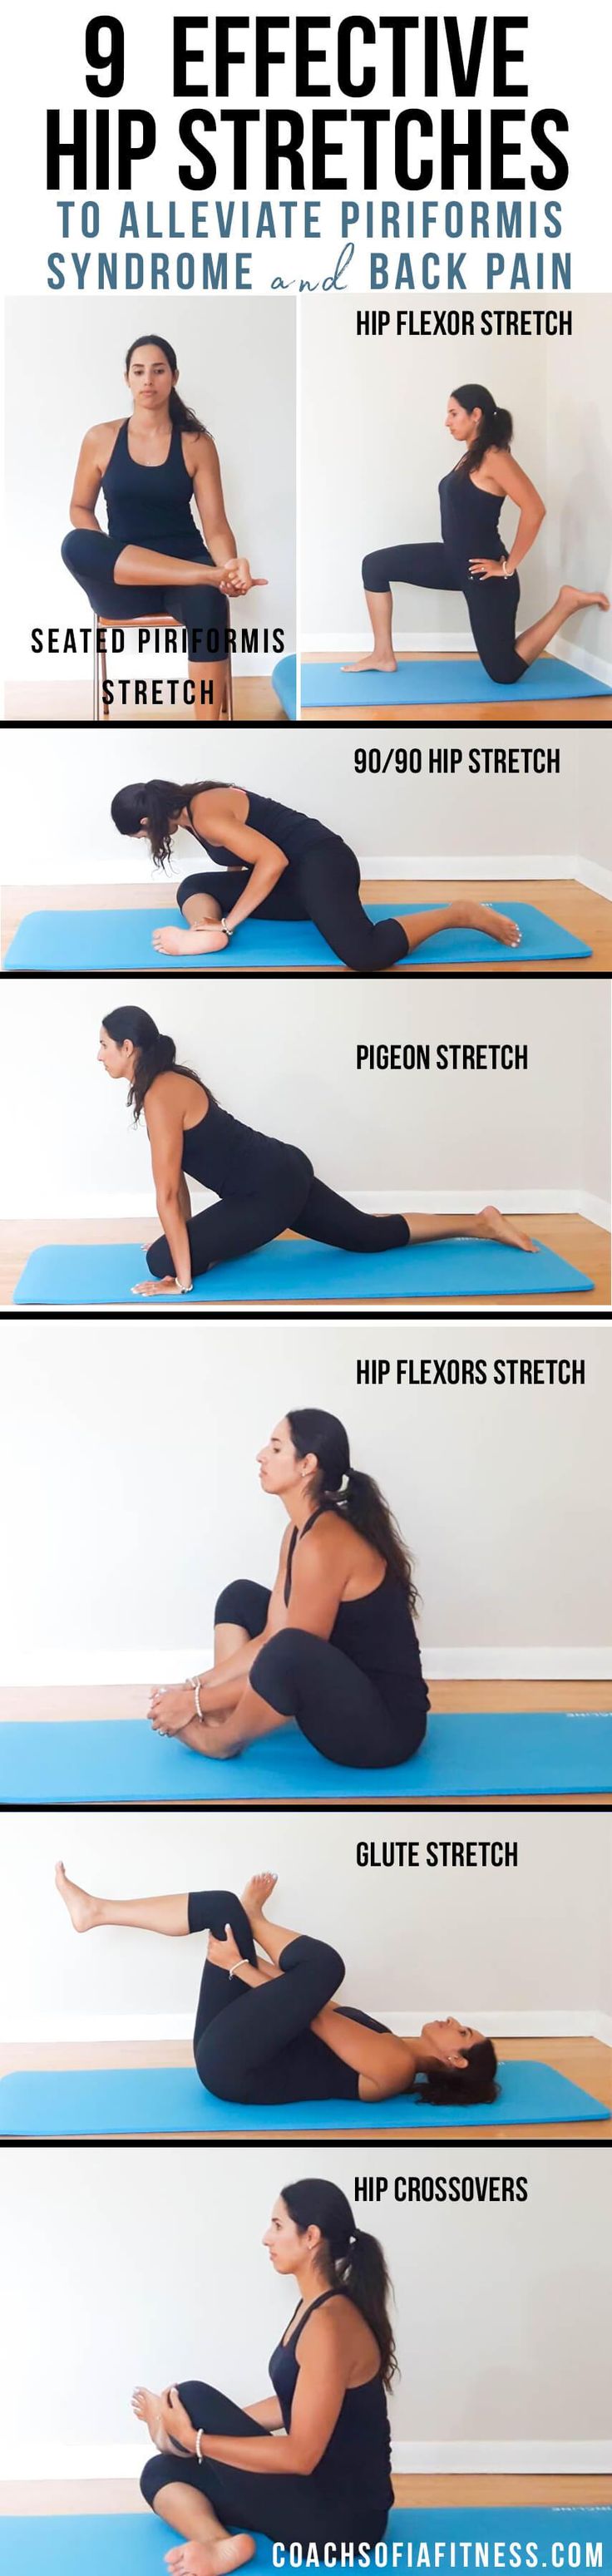 While over stretching may not necessarily be good for your lower back, in this g...